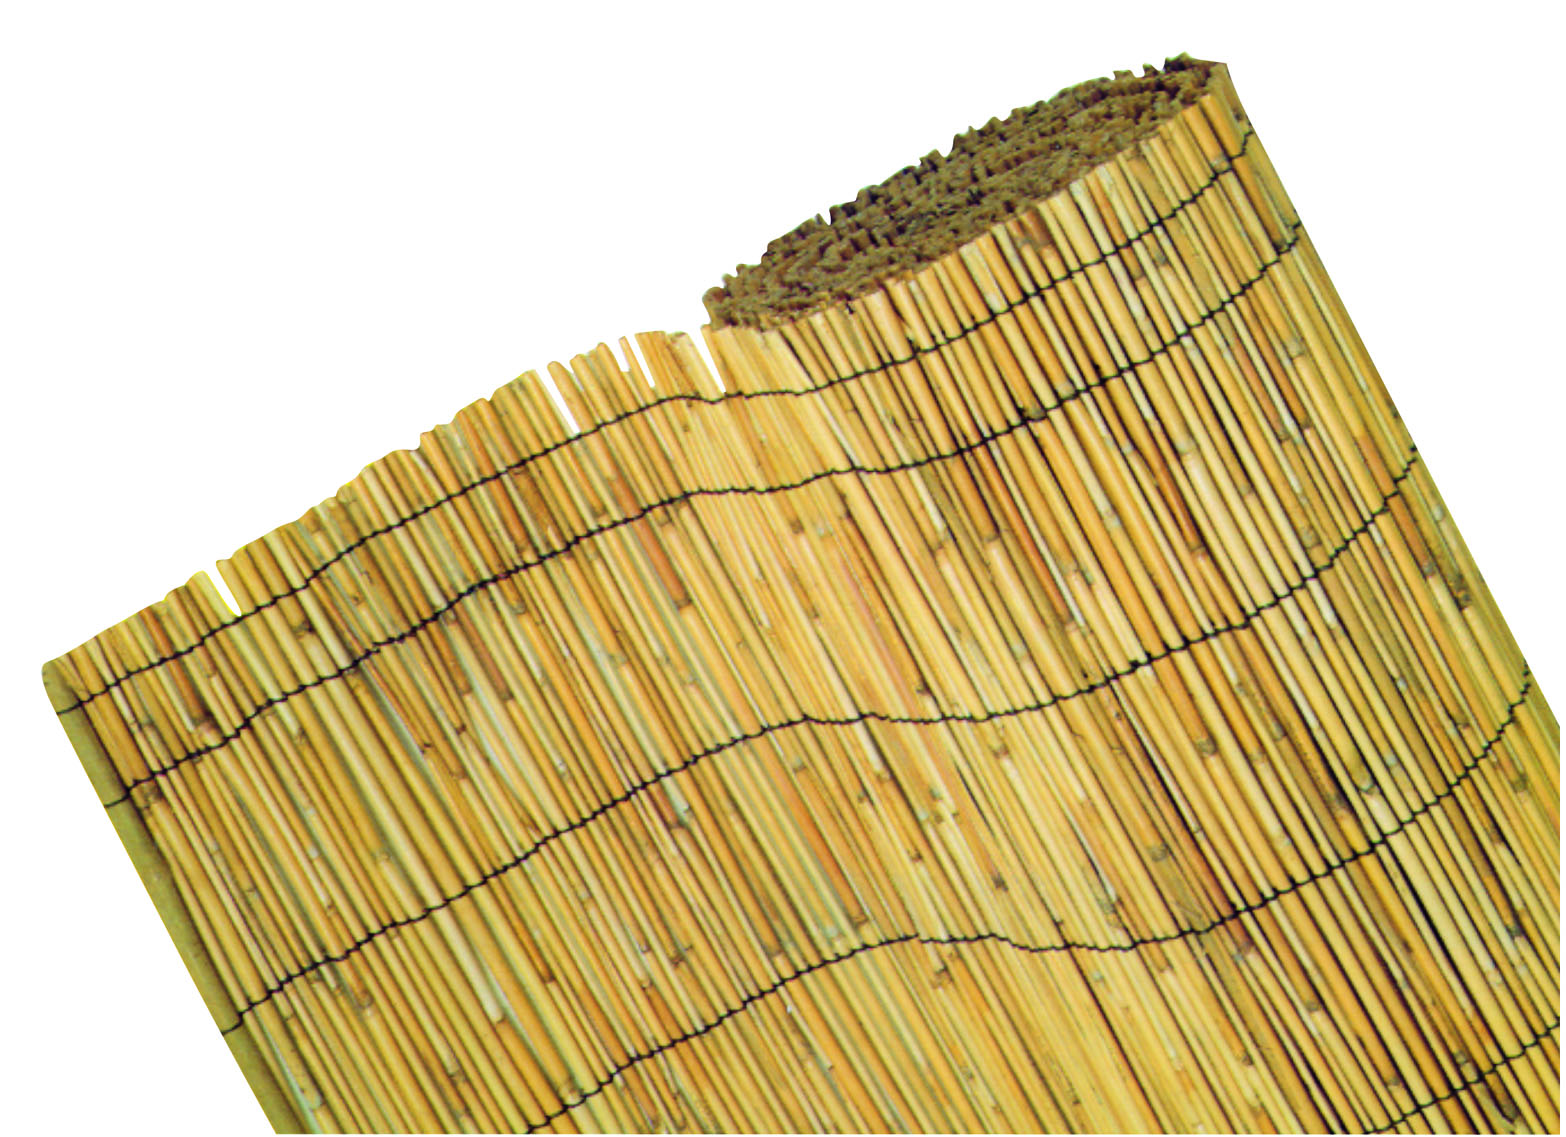 REED SCREEN FENCING 1.5X5M